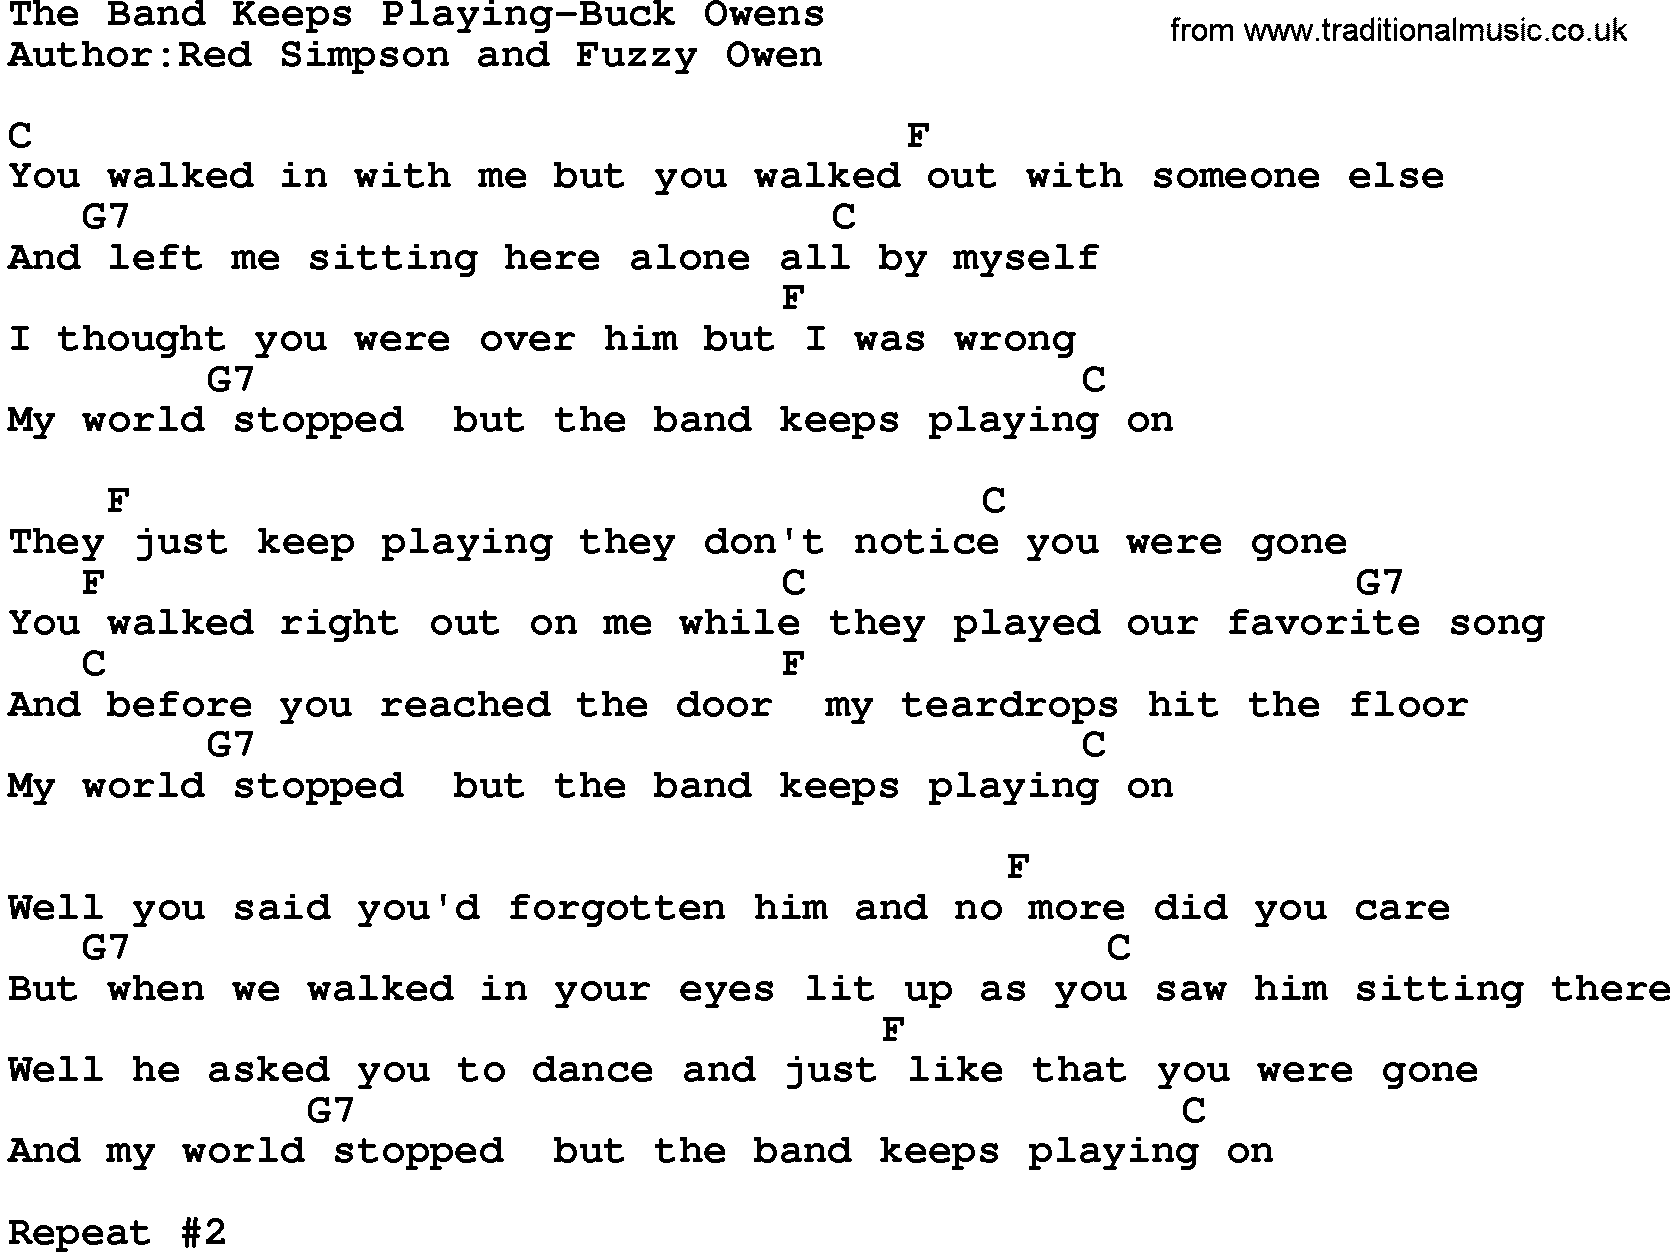 Country music song: The Band Keeps Playing-Buck Owens lyrics and chords